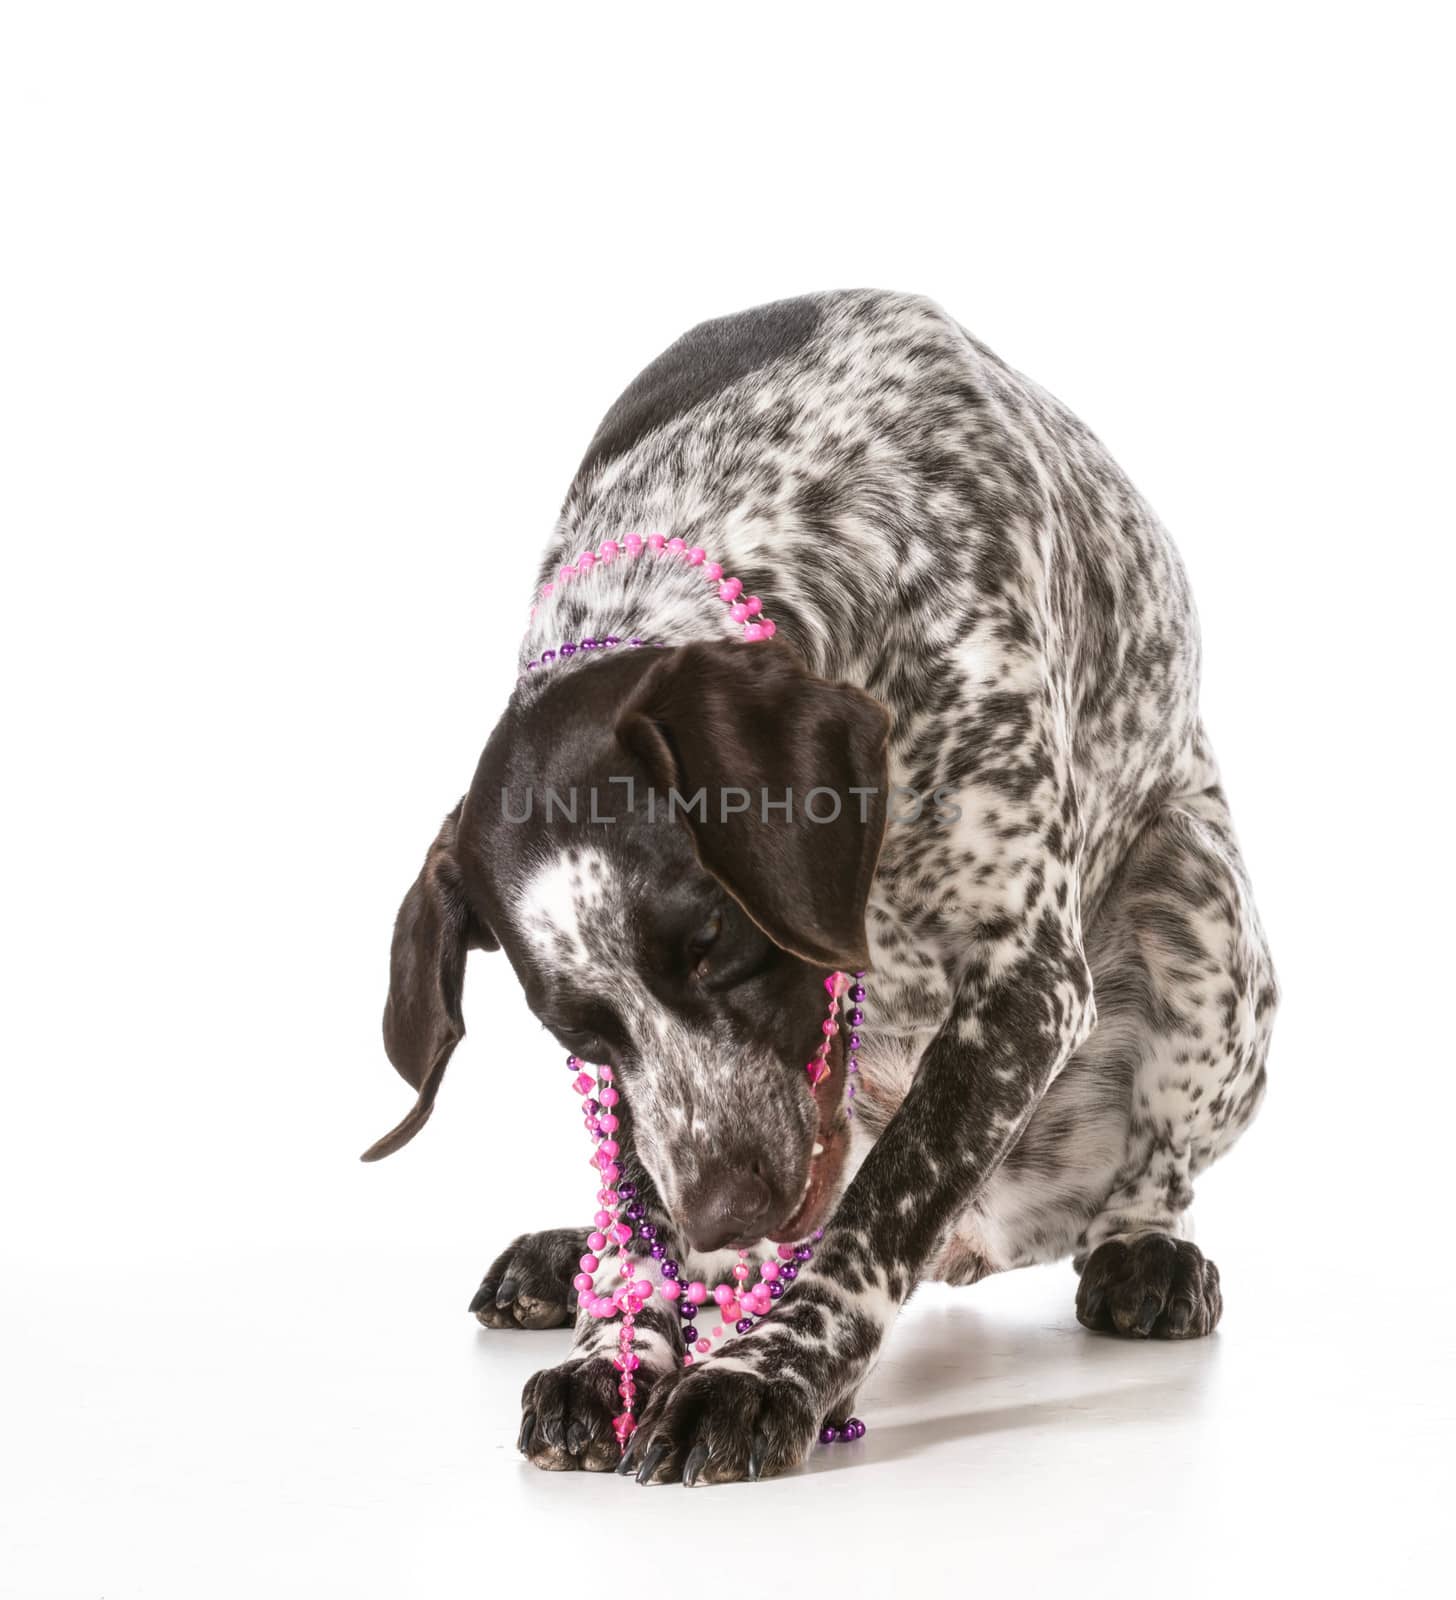 bad dog - naughty german shorthaired pointer chewing on beads isolated on white background